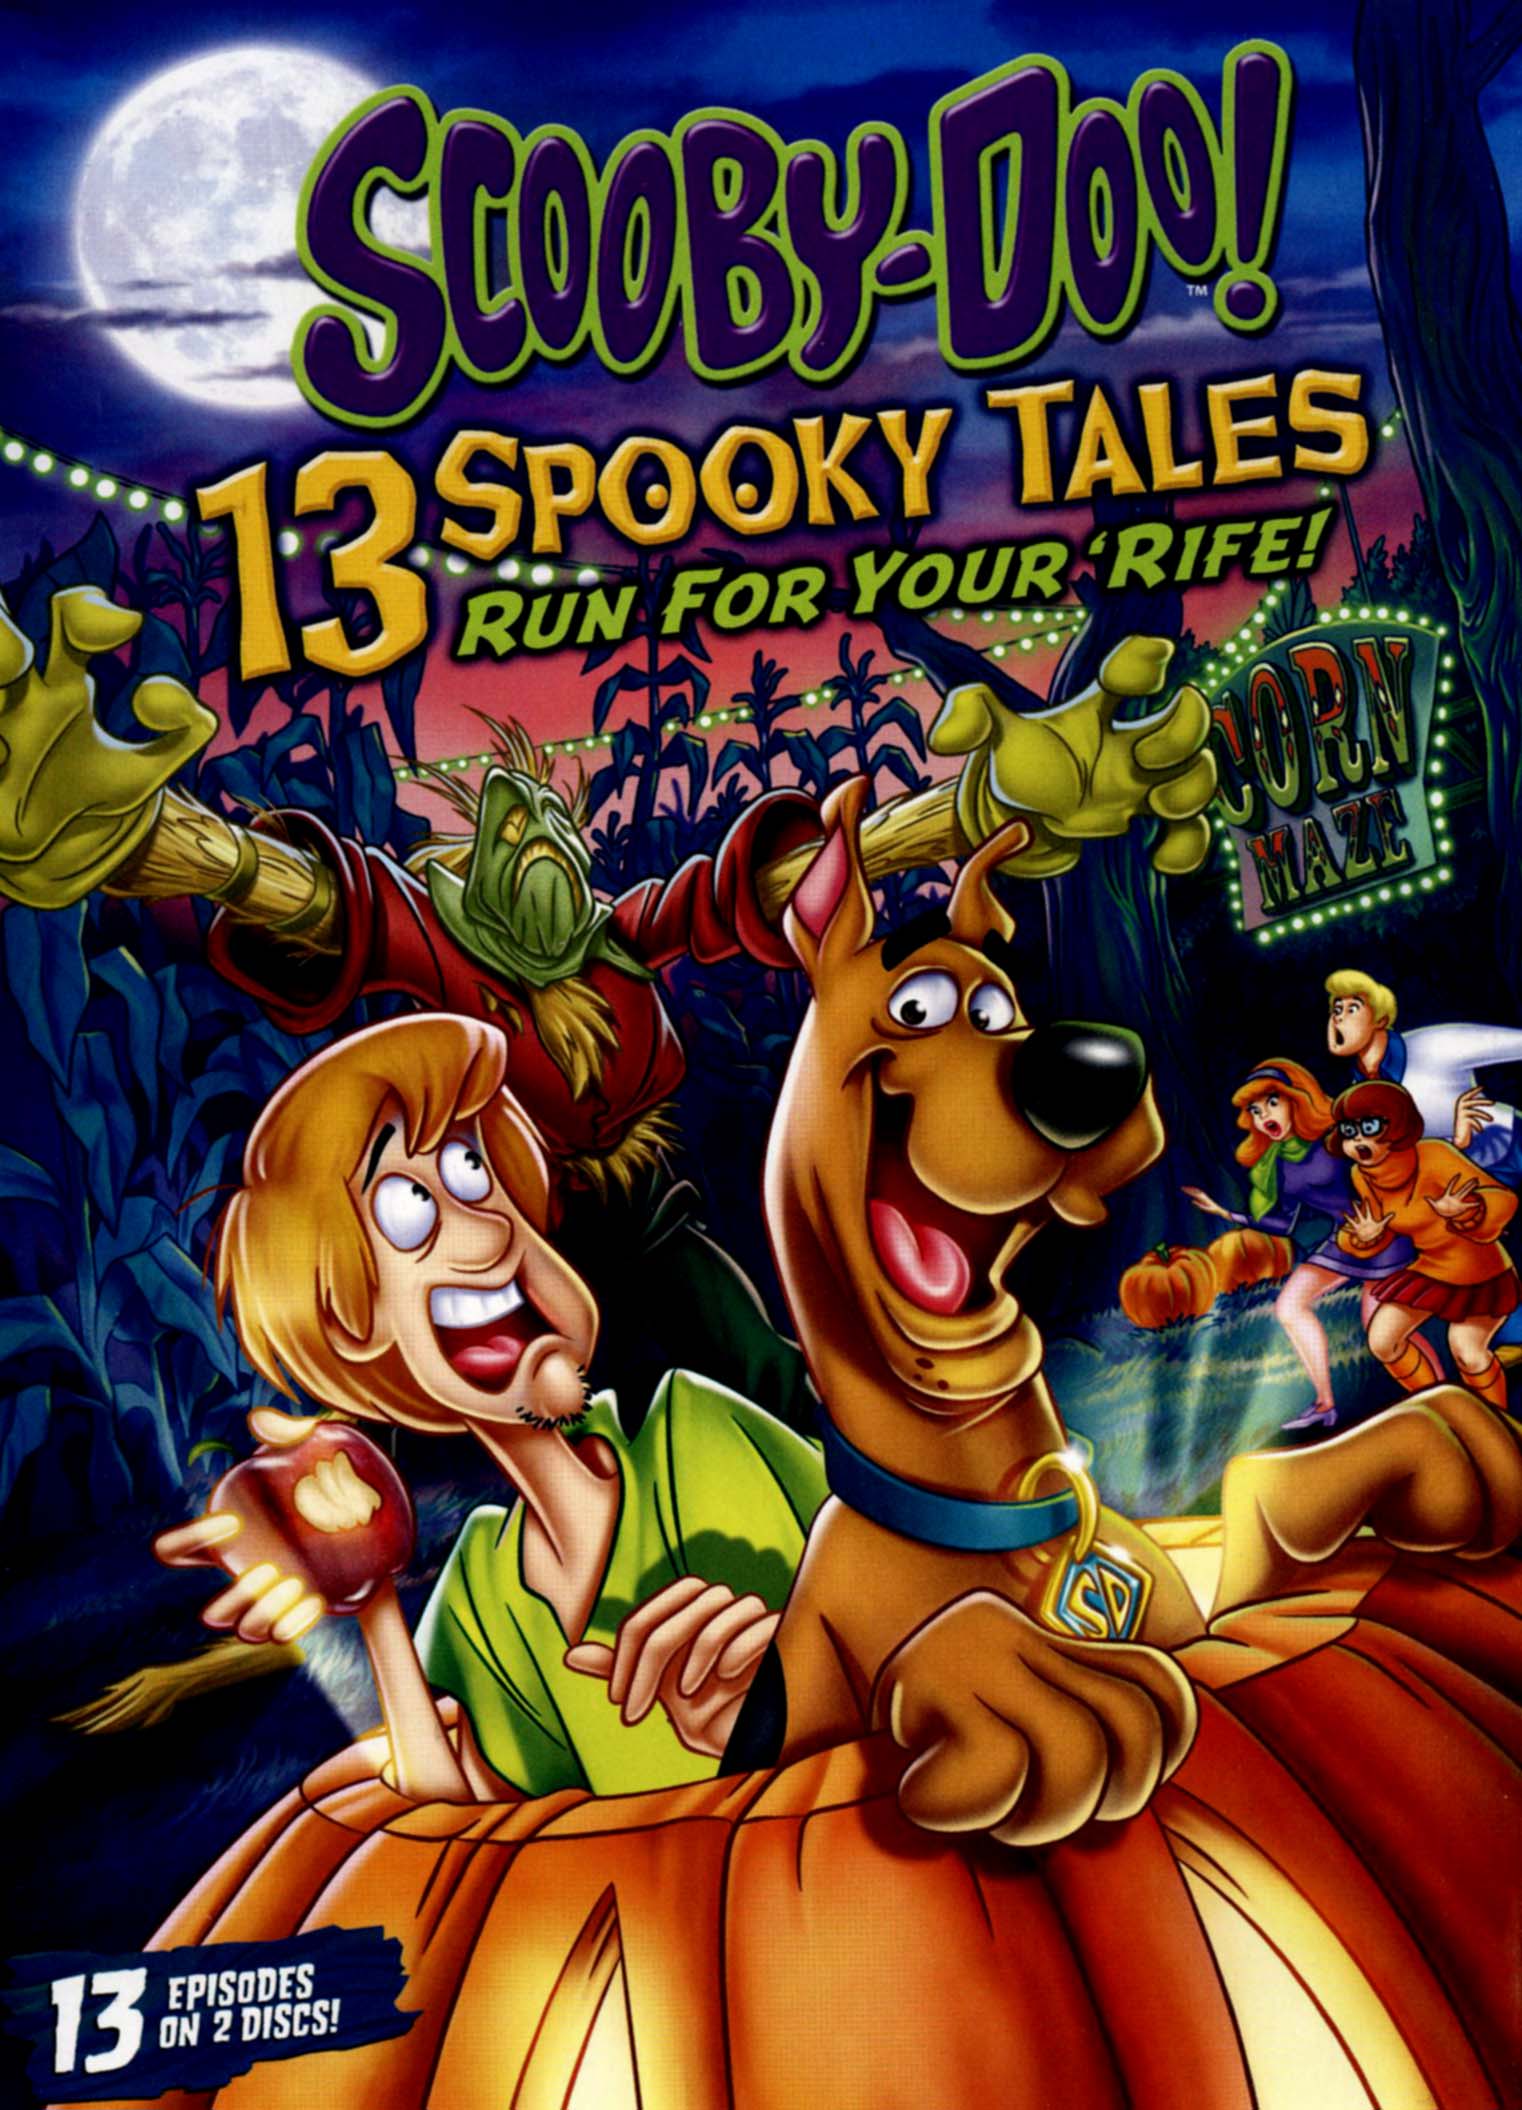 Scooby-Doo!: 13 Spooky Tales Run for Your 'Rife! [DVD] - Best Buy